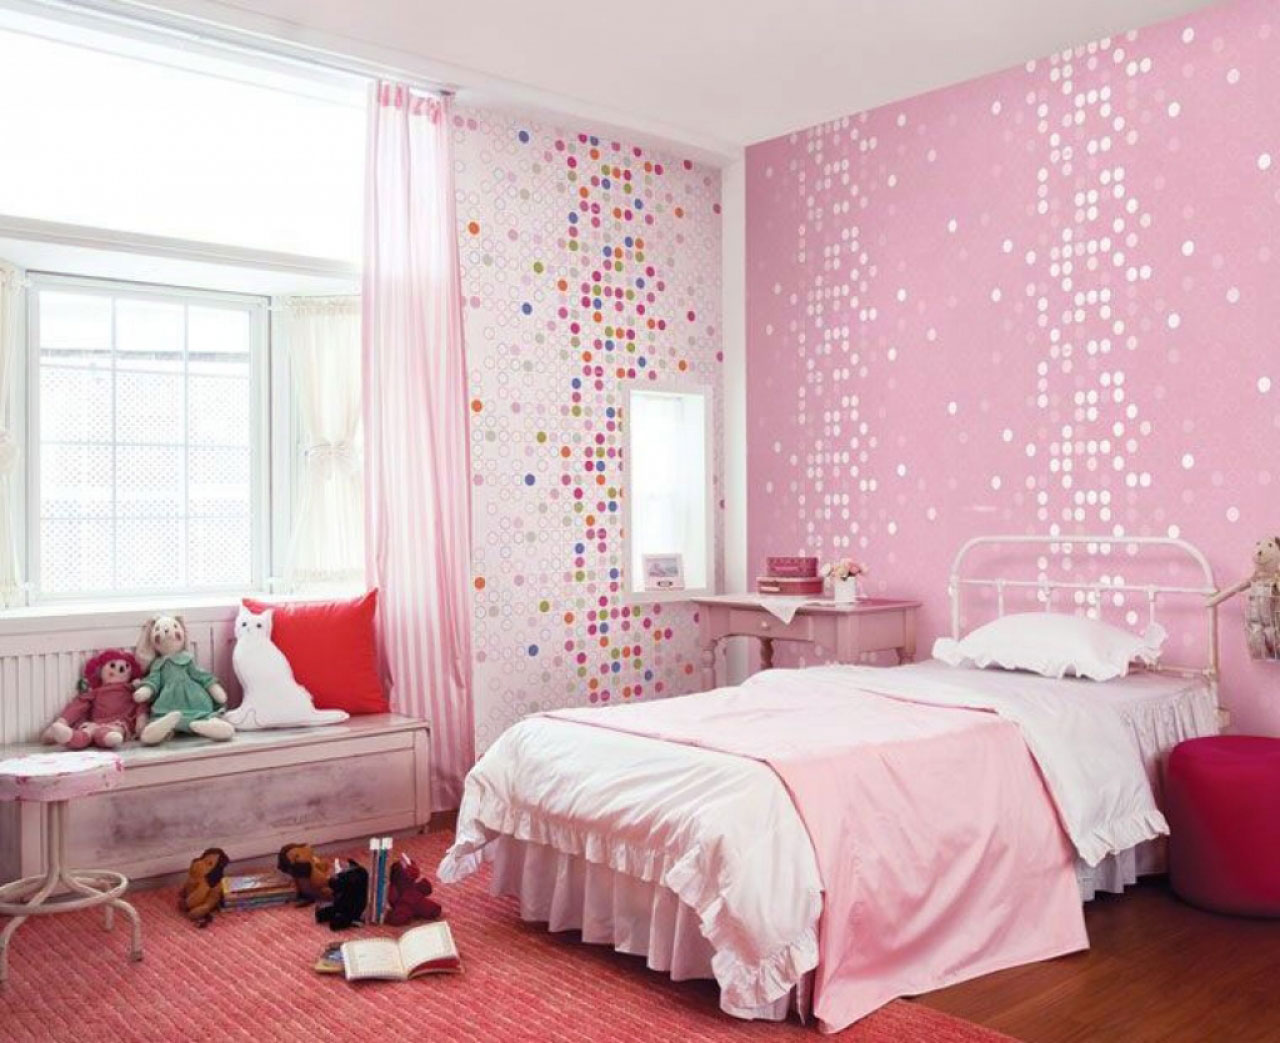 Dot Wallpaper Girl Polka Dot Wallpaper Also Pretty Girl Bedroom Furniture With White Metal Frame Bed Plus Small Window Bench Also Plush Red Area Rug Bedroom Girl Bedroom Decoration Ideas Added With Simple Furniture